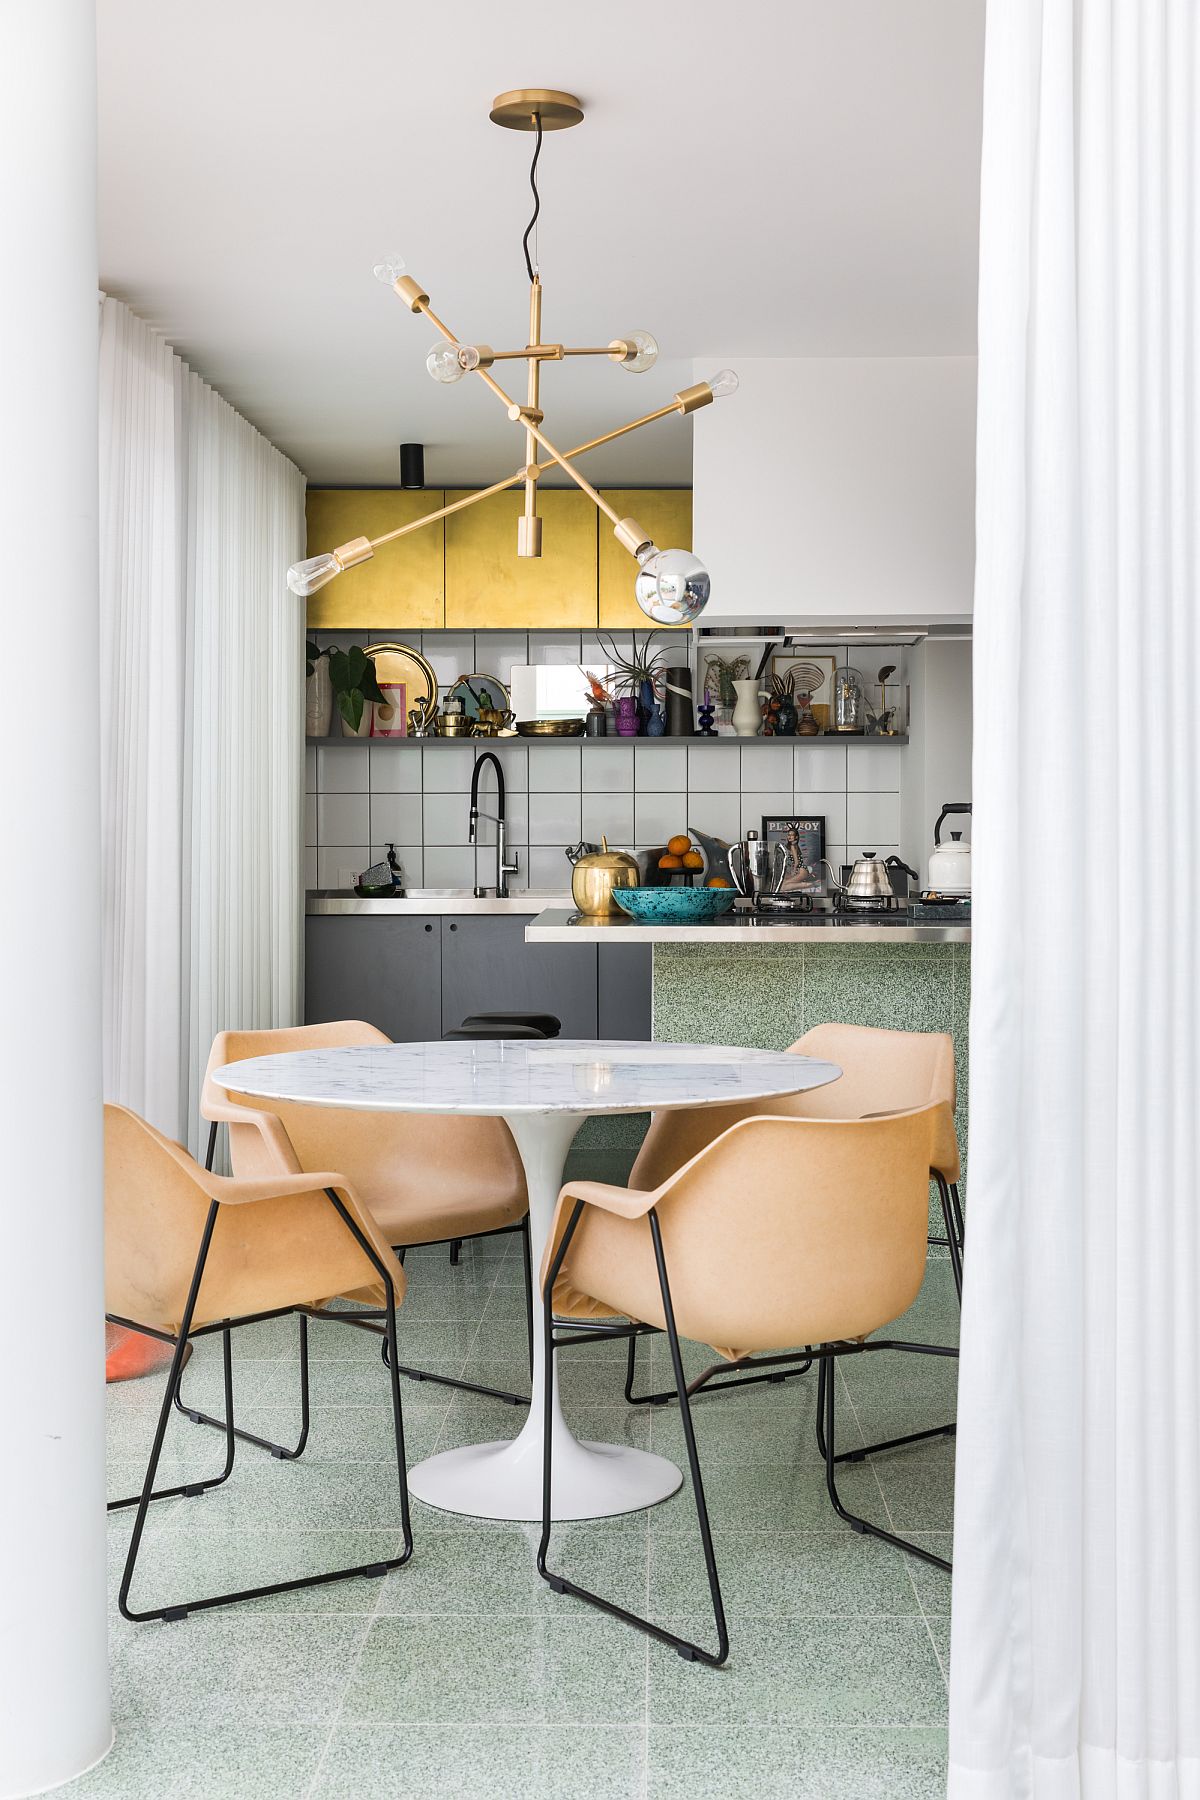 Stylish Saarinen Table and West Elm pendant lighting combined to create a glam dining area